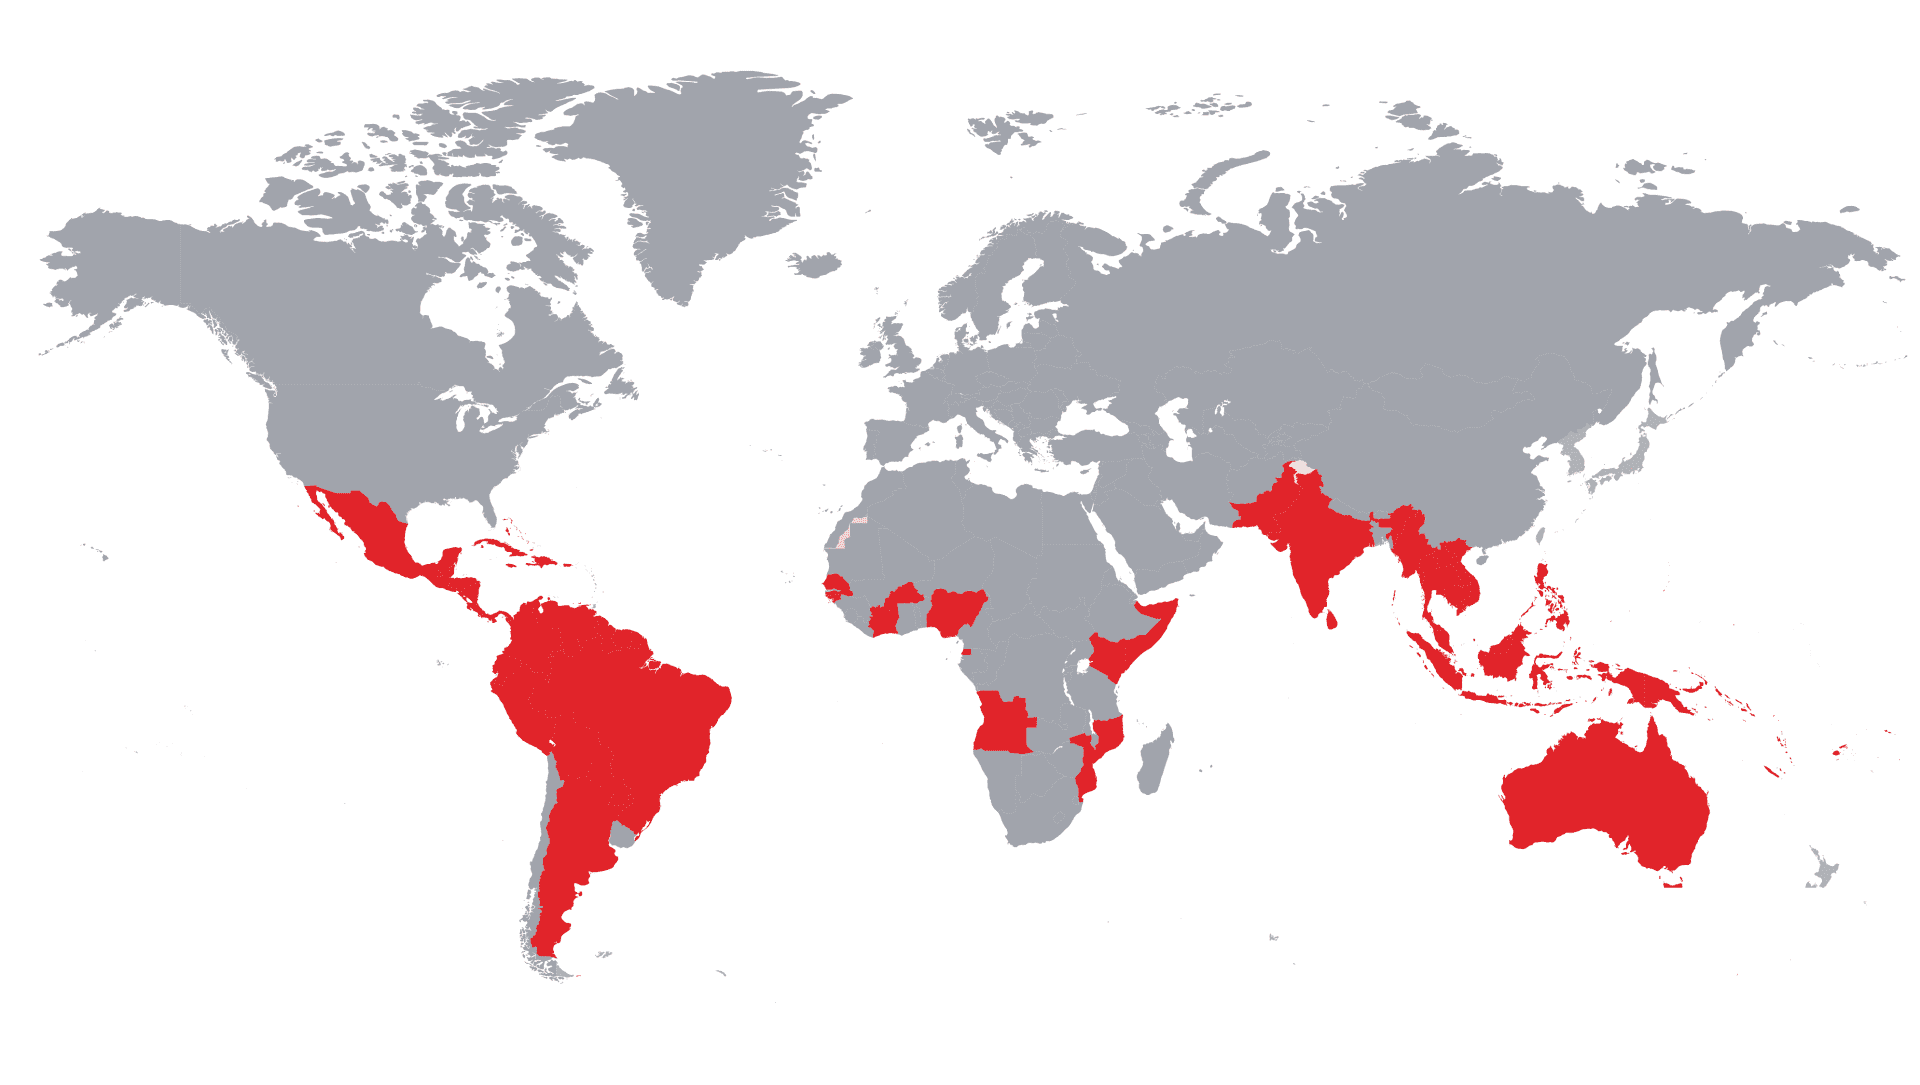 World map with endemic countries highlighted in red